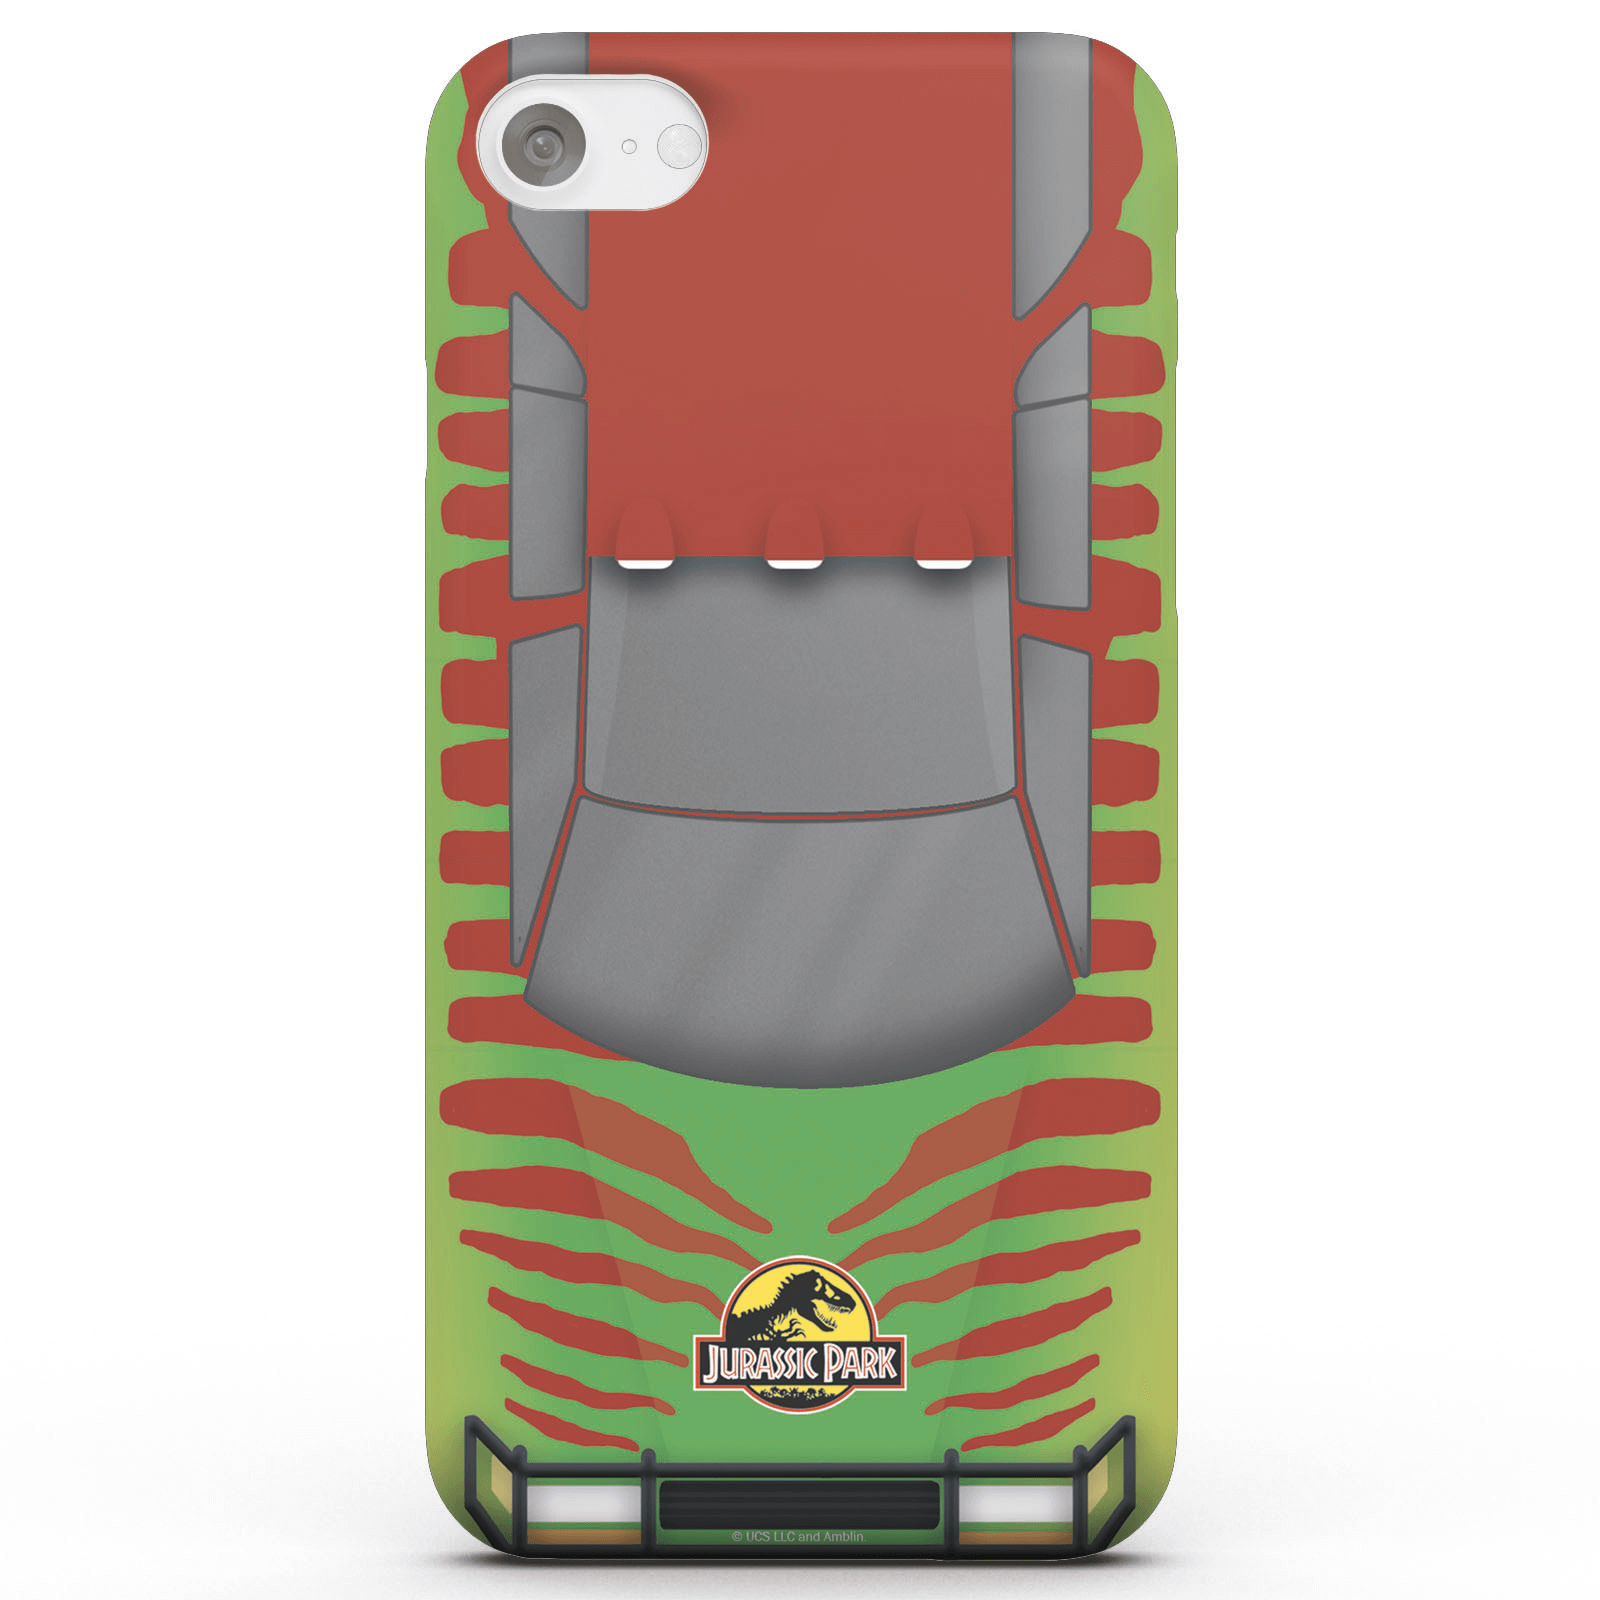 Photos - Case Jurassic Park Tour Car Phone  for iPhone and Android - iPhone 5C - Sna